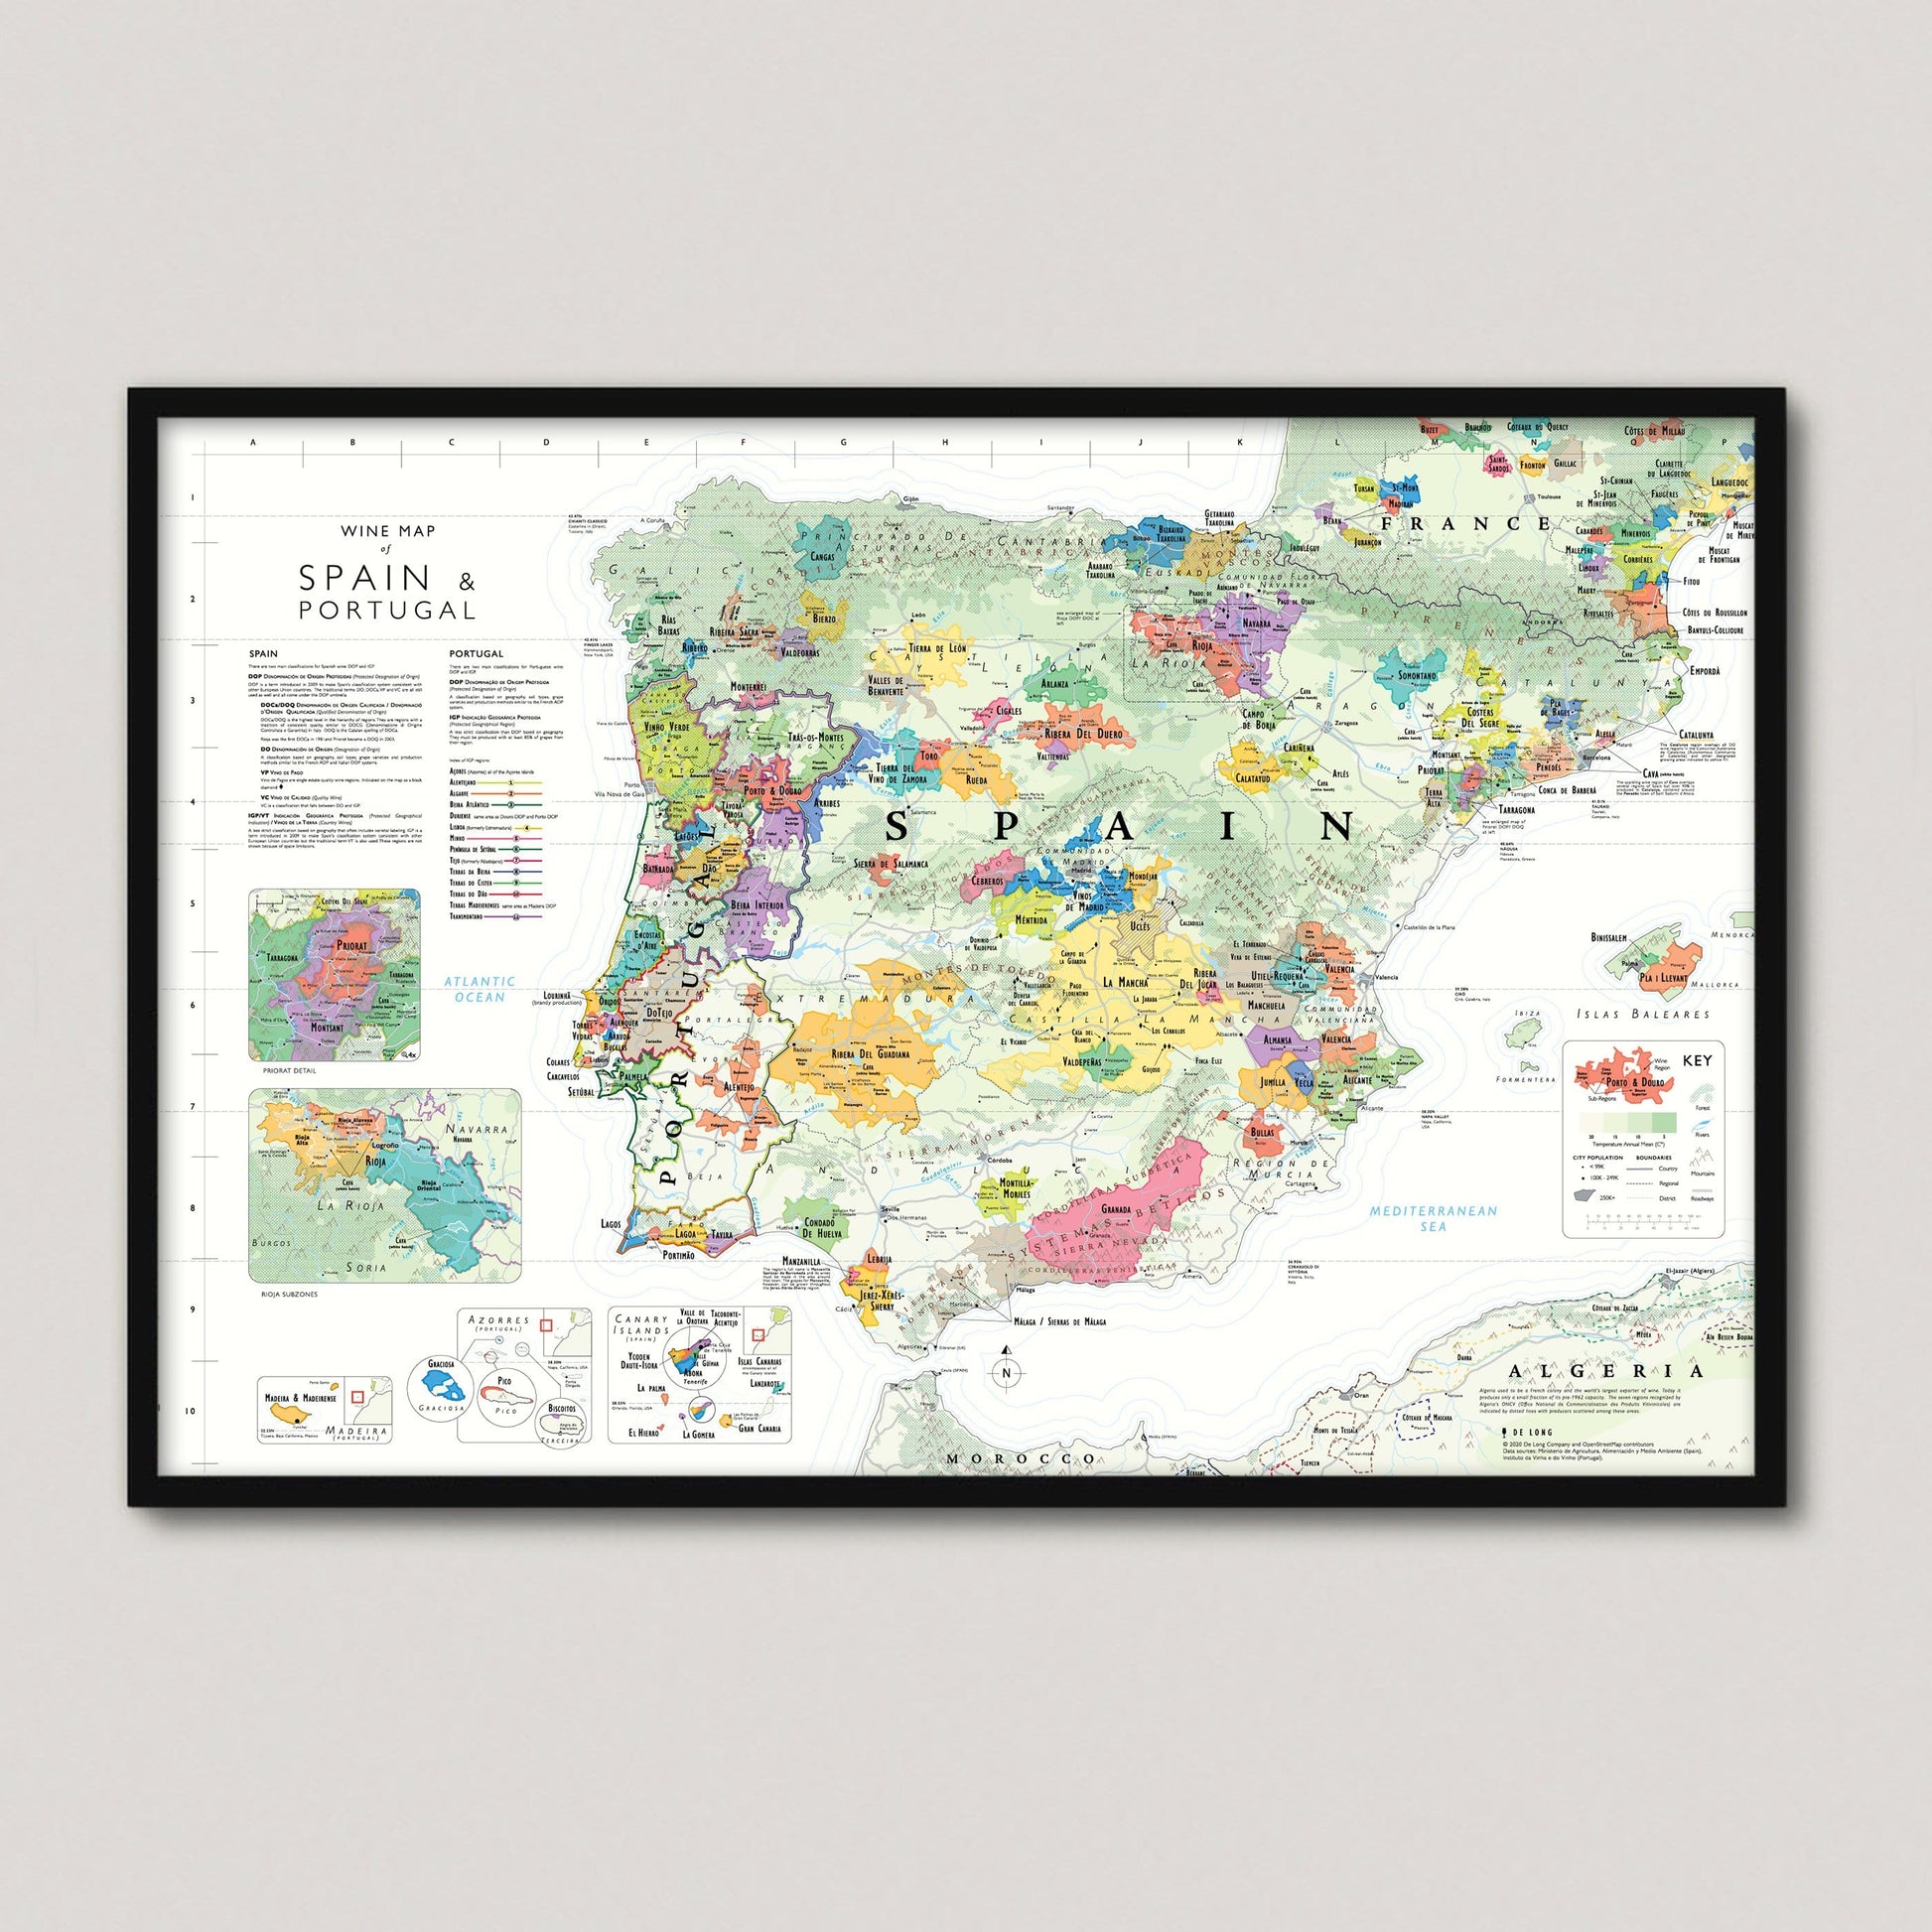 Wine Map of Spain and Portugal Framed - De Long